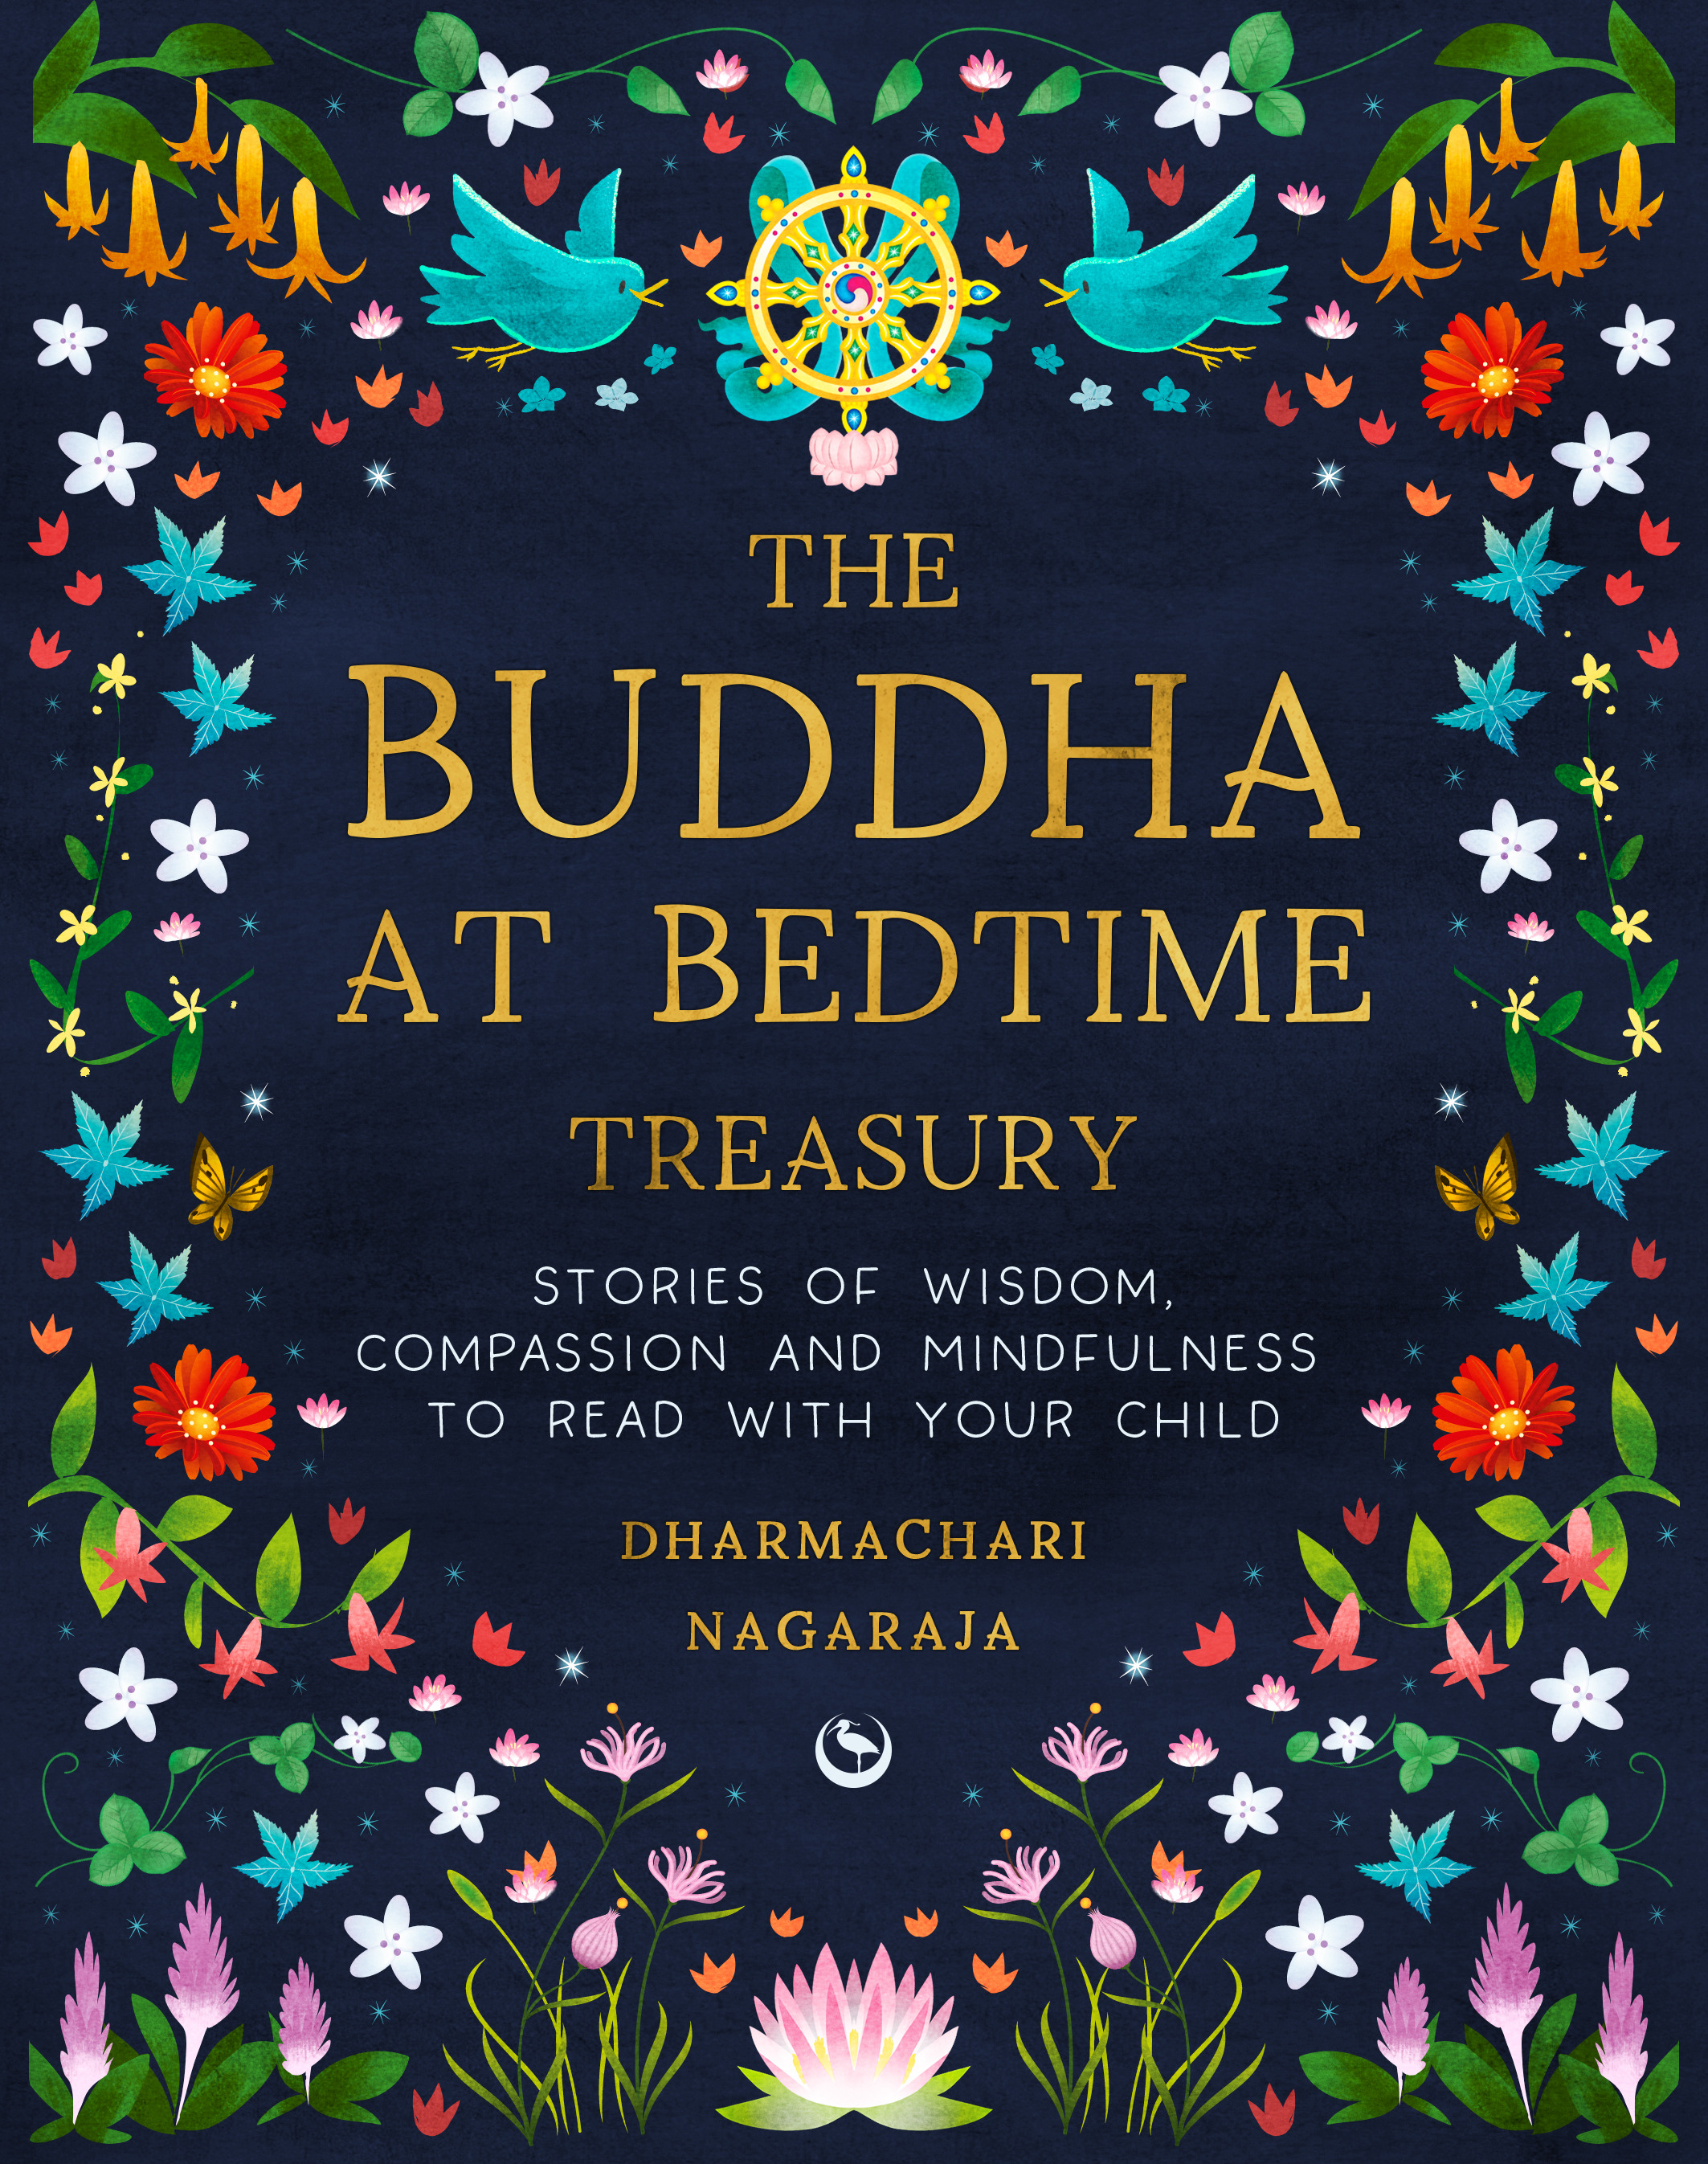 The Buddha at Bedtime Treasury : Stories of Wisdom, Compassion and Mindfulness to Read with Your Child | Nagaraja, Dharmachari (Auteur)